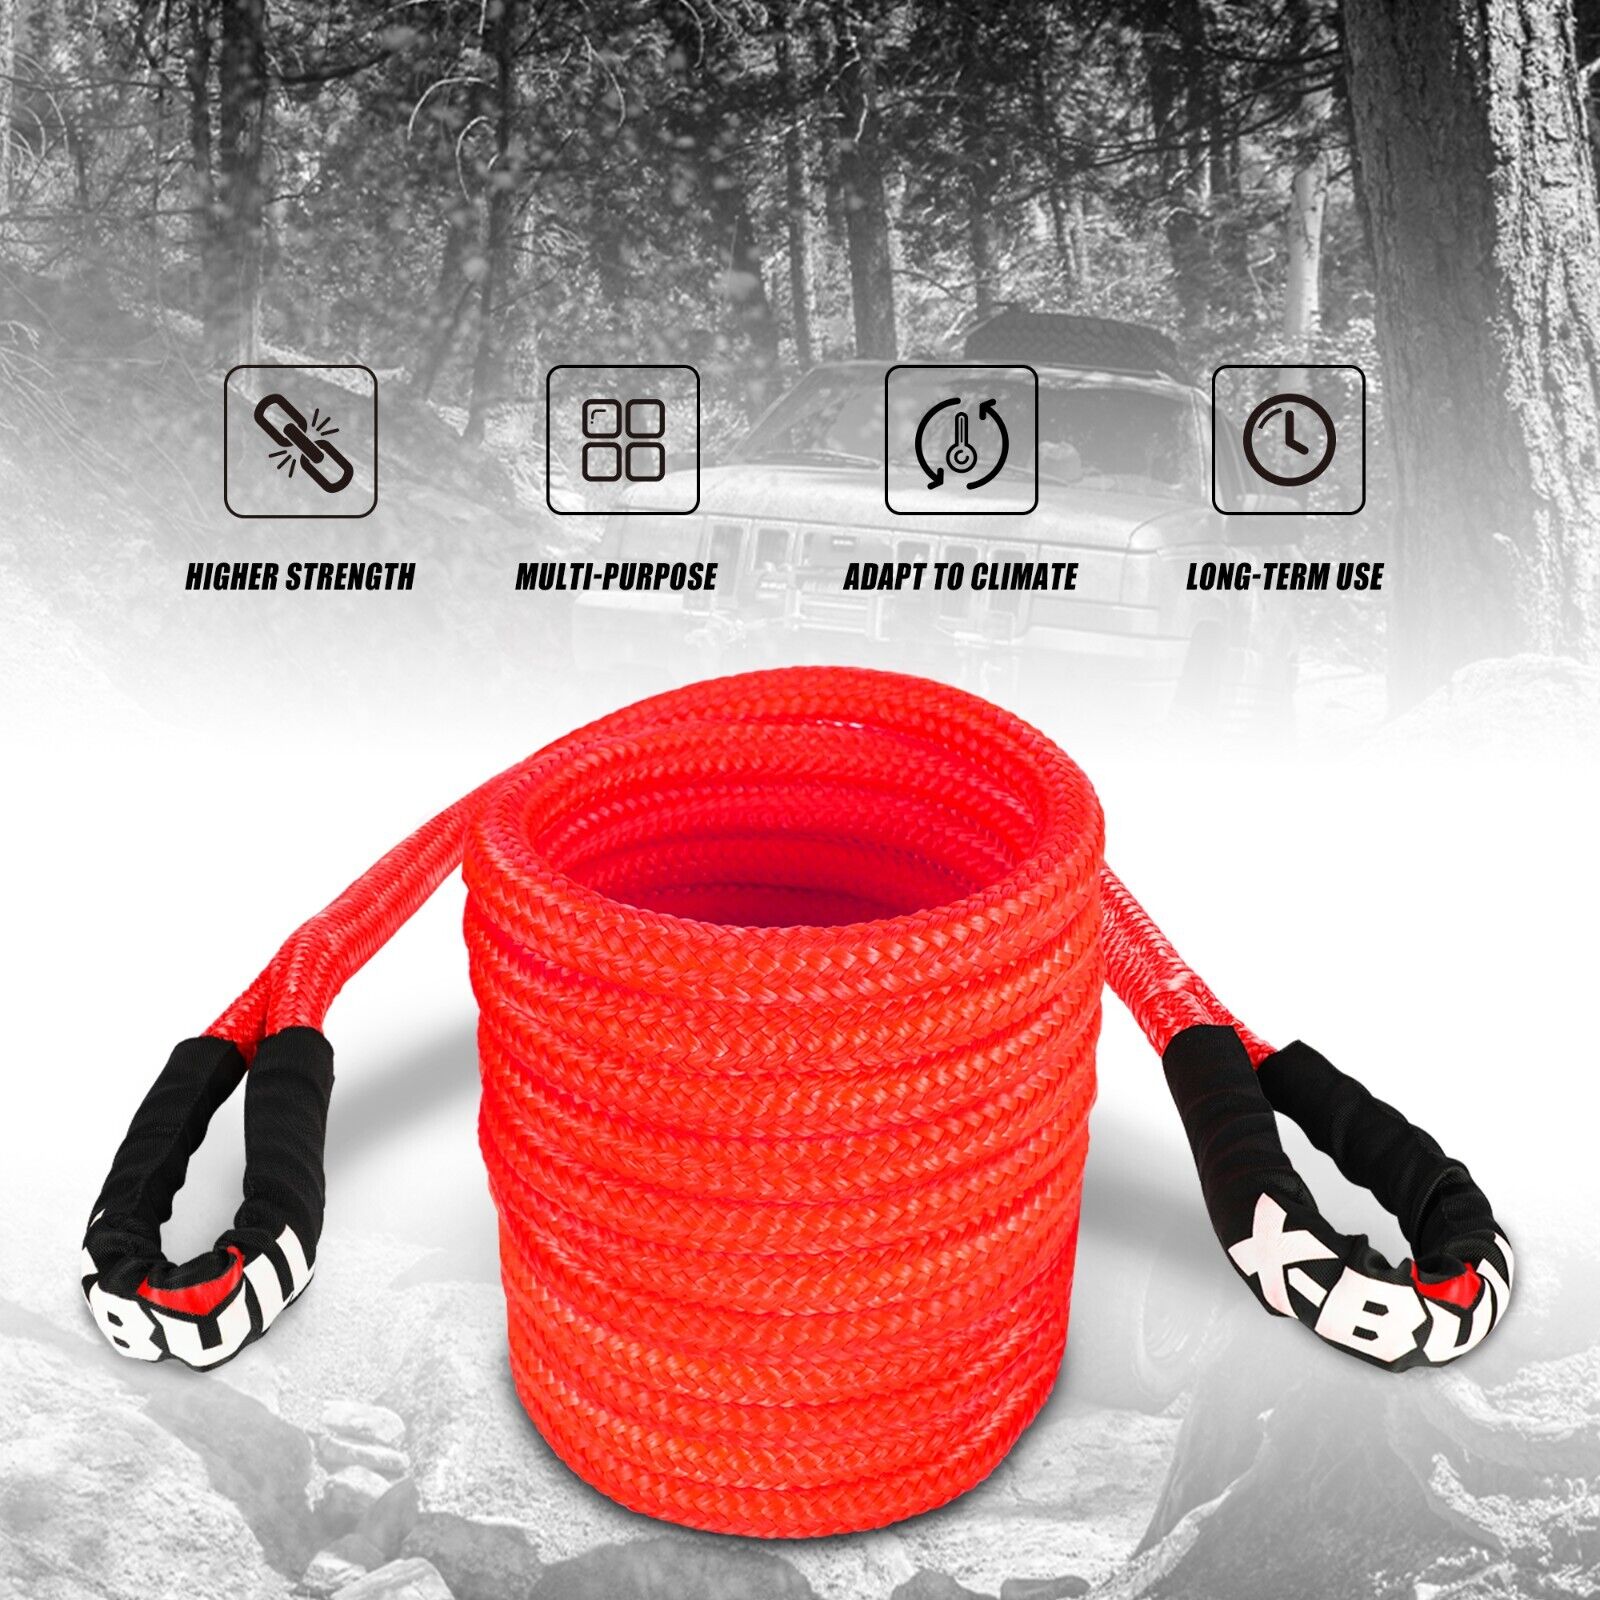 x-bull-kinetic-rope-22mm-x-9m-snatch-strap-recovery-kit-dyneema-tow-winch